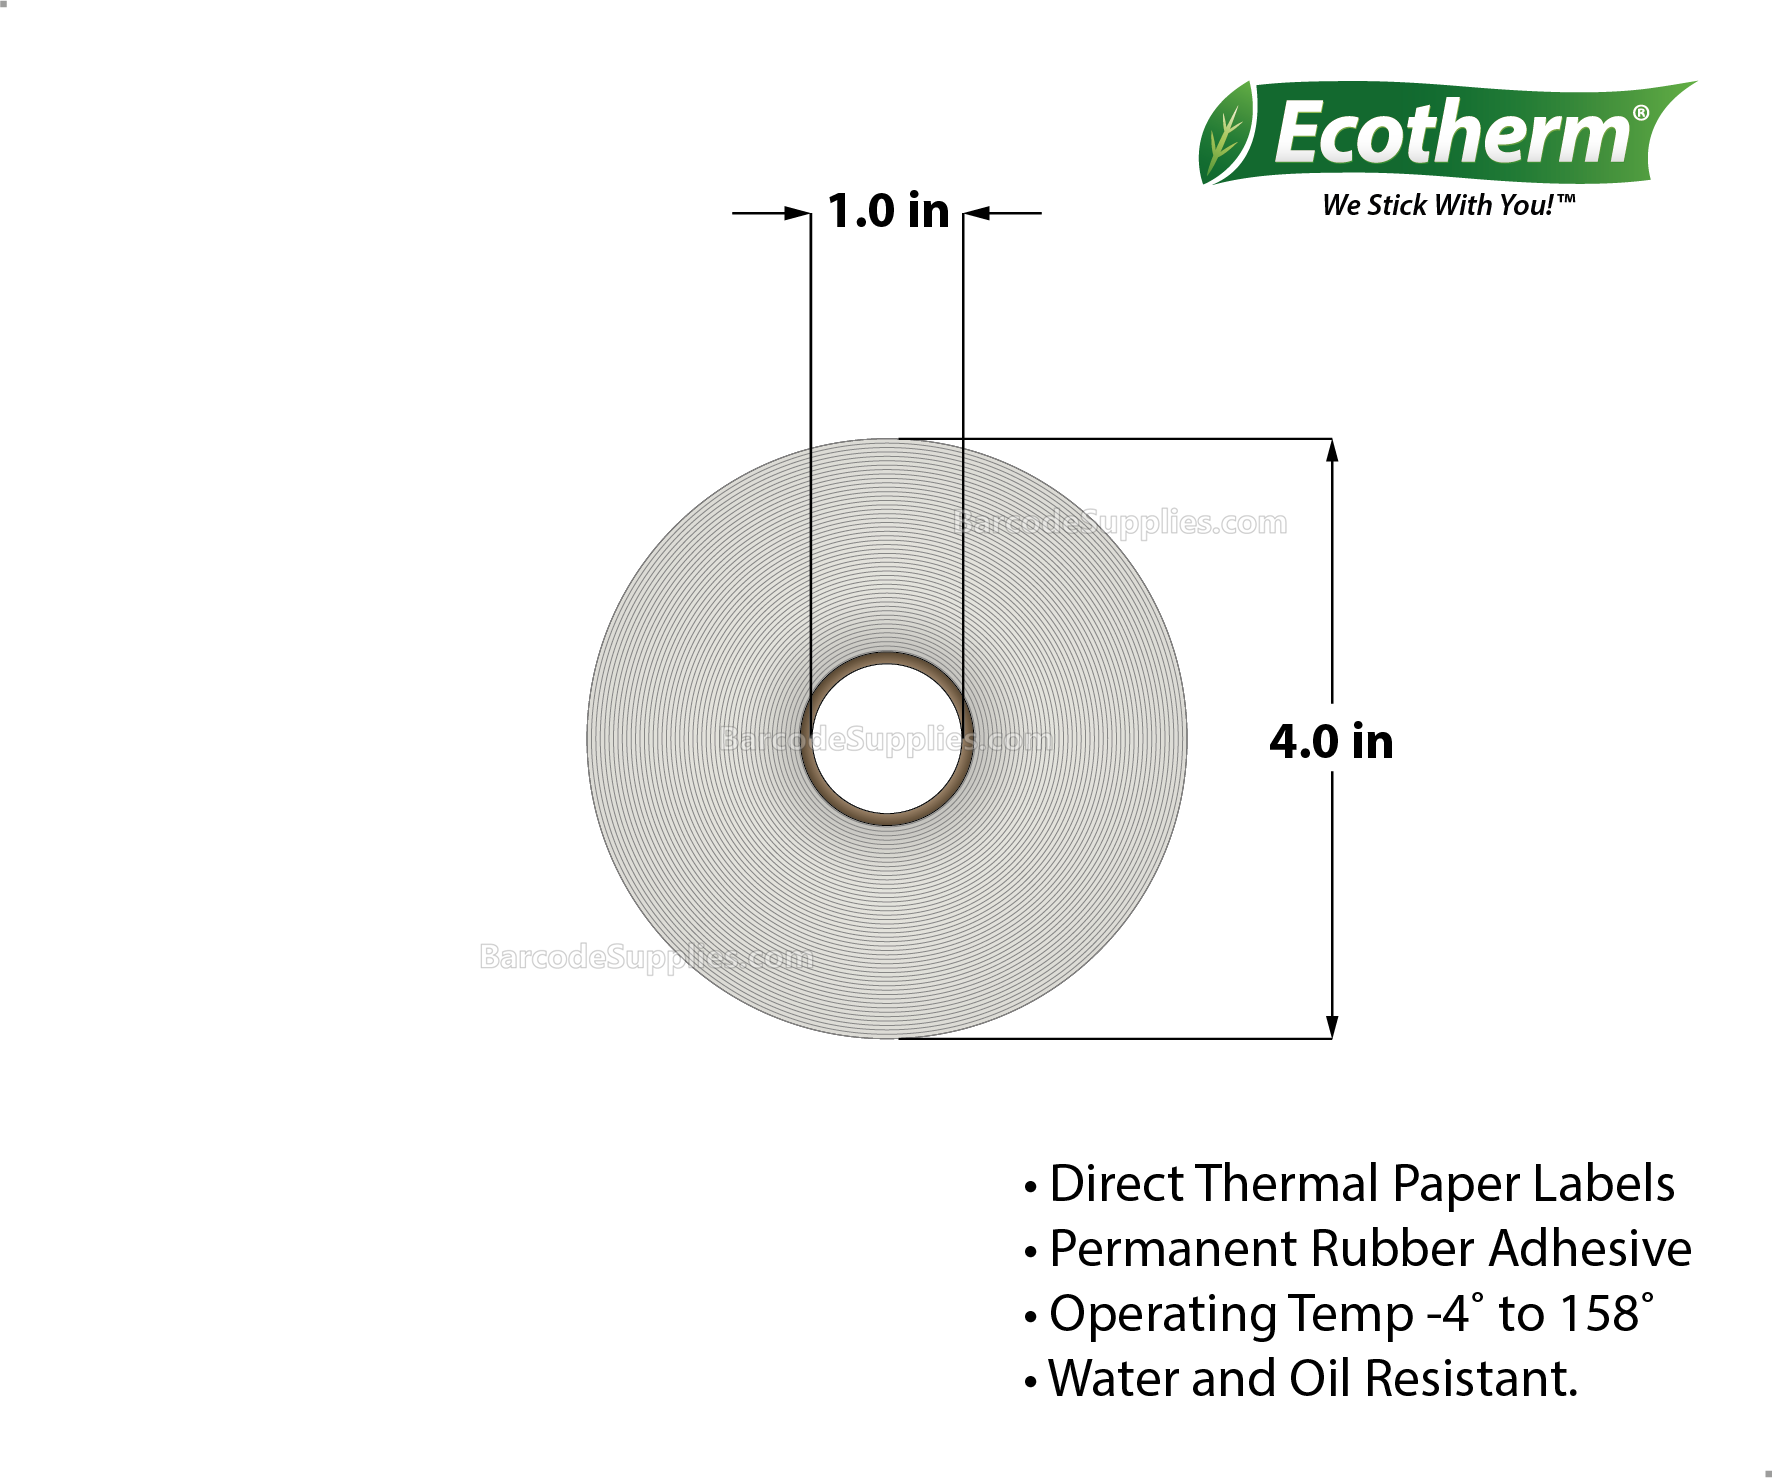 1.2 x 0.85 Direct Thermal White Labels With Rubber Adhesive - Perforated - 2200 Labels Per Roll - Carton Of 4 Rolls - 8800 Labels Total - MPN: ECOTHERM14131-4